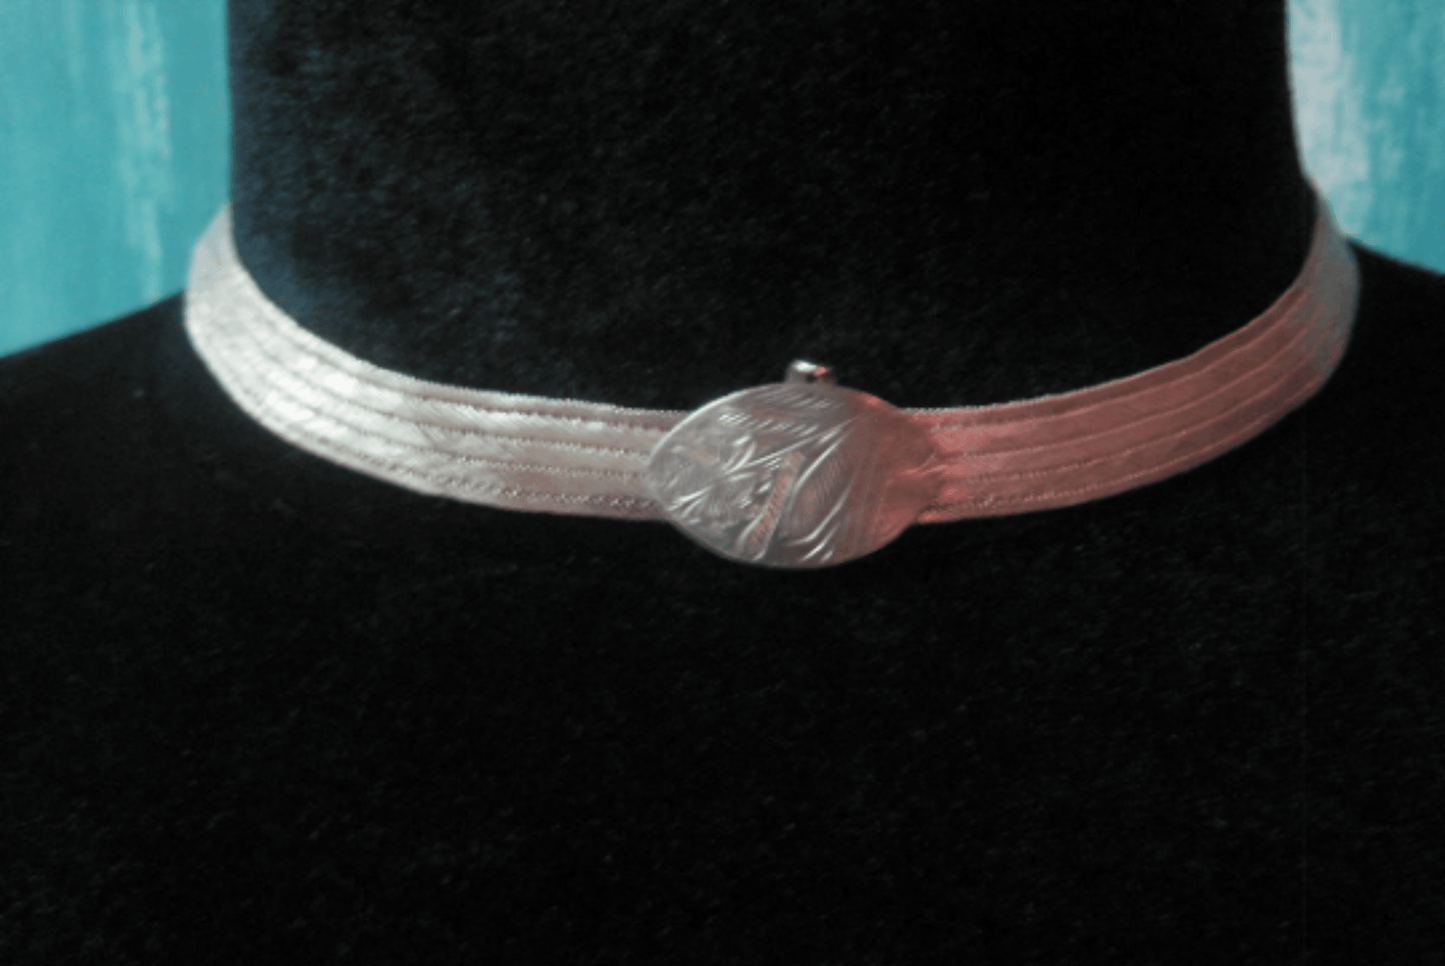 Vintage Hand Woven Silver Choker Necklace from Trabzon - Anteeka